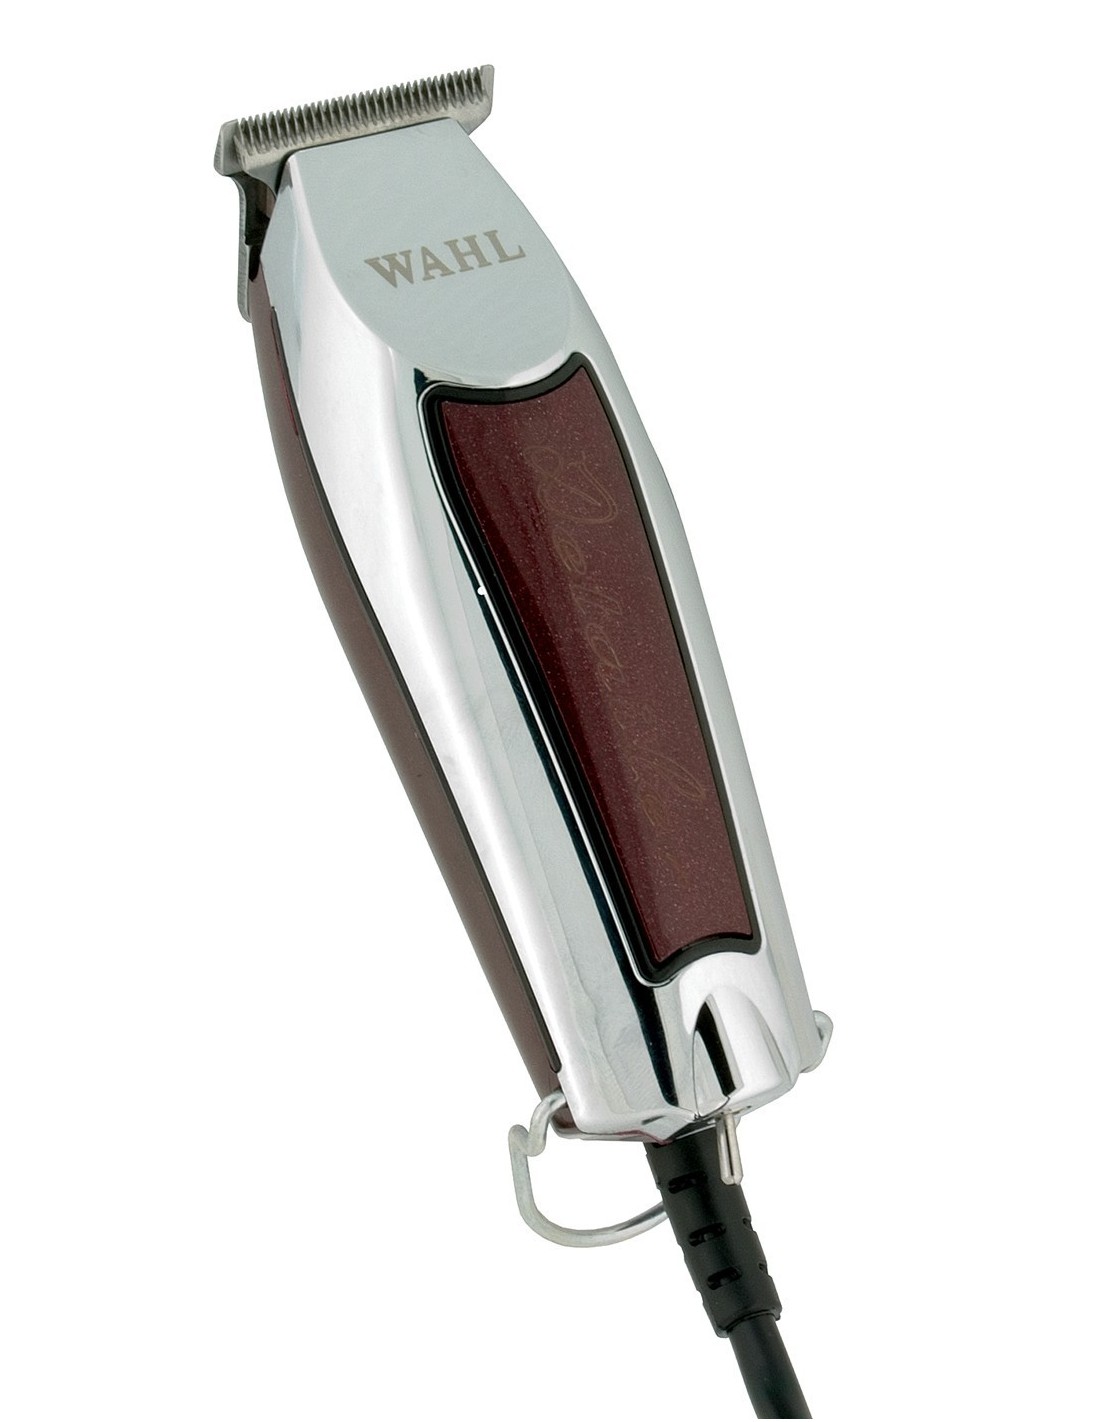 wahl clipper and trimmer set asda